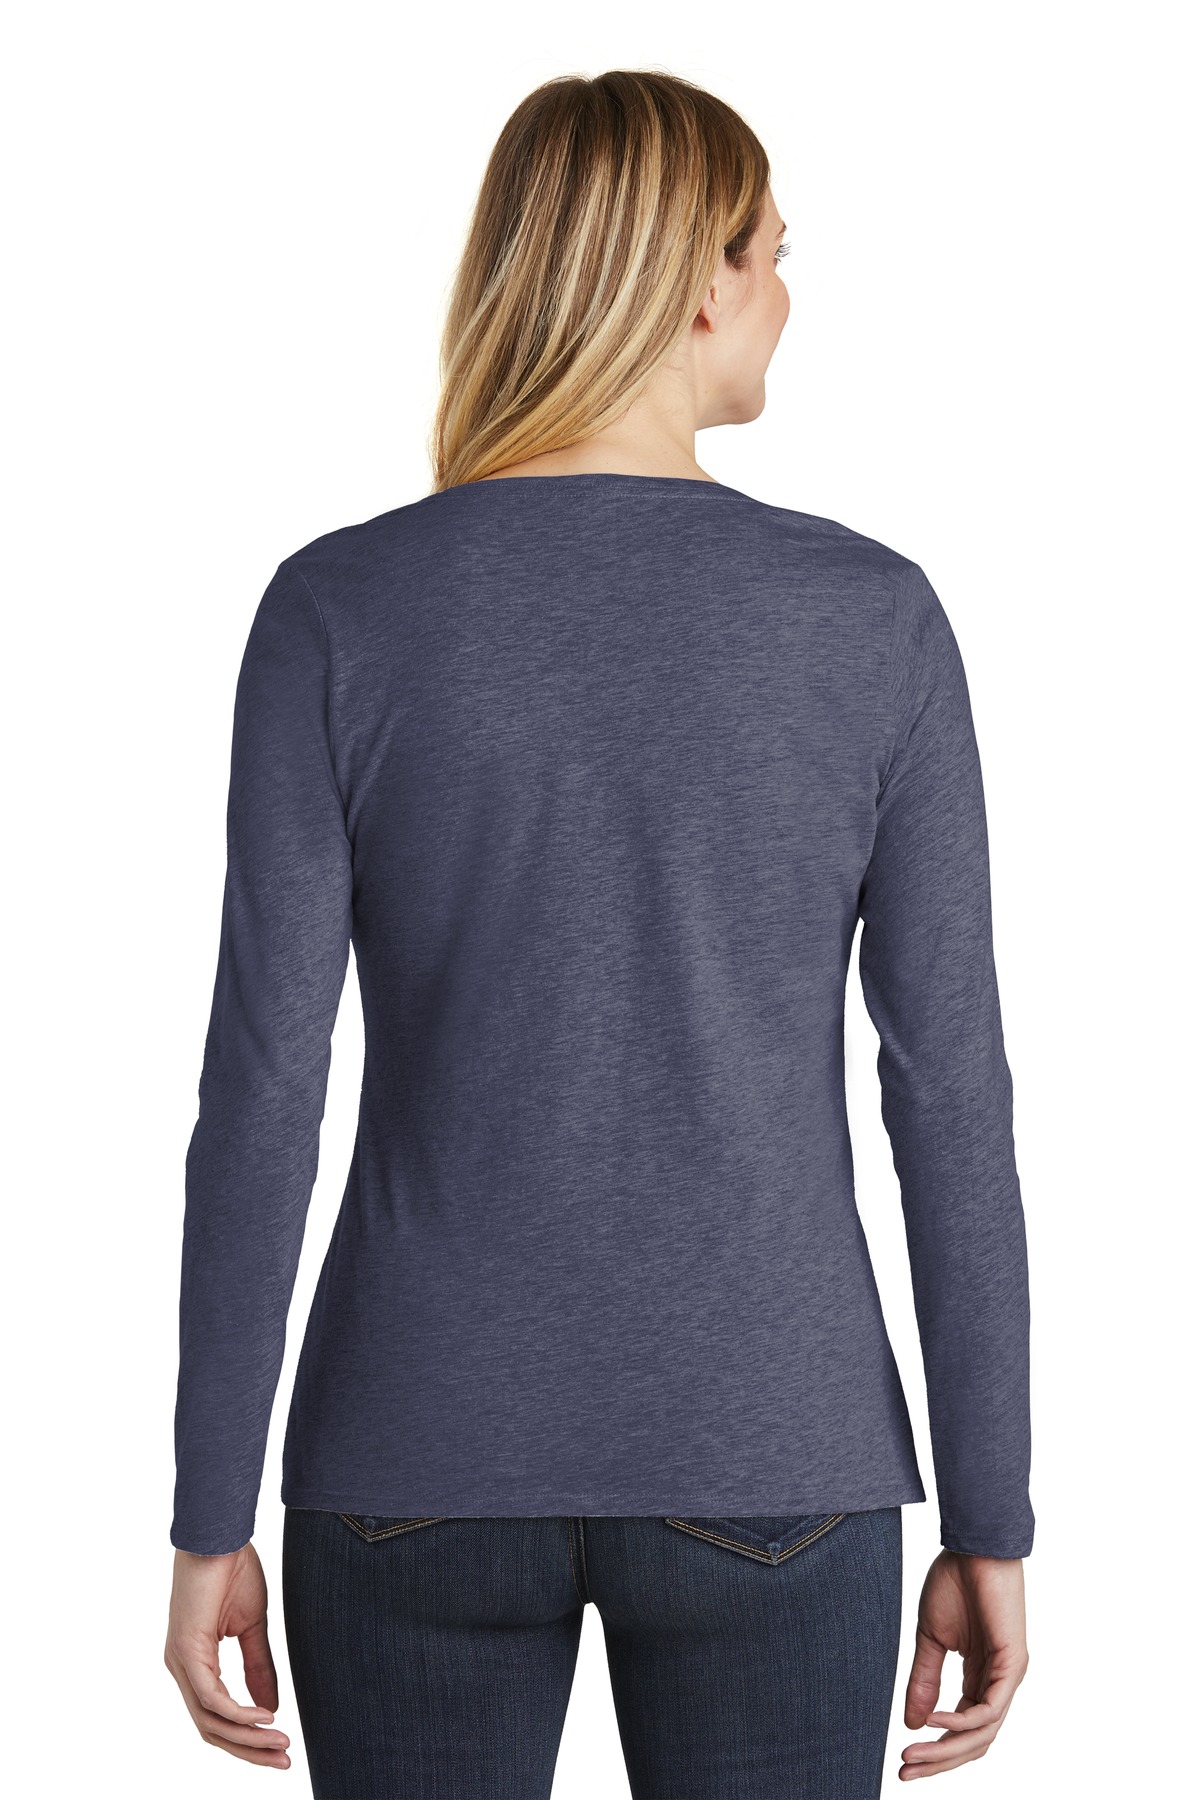 District DT6201 | Women's Very Important Tee ® Long Sleeve V-Neck ...